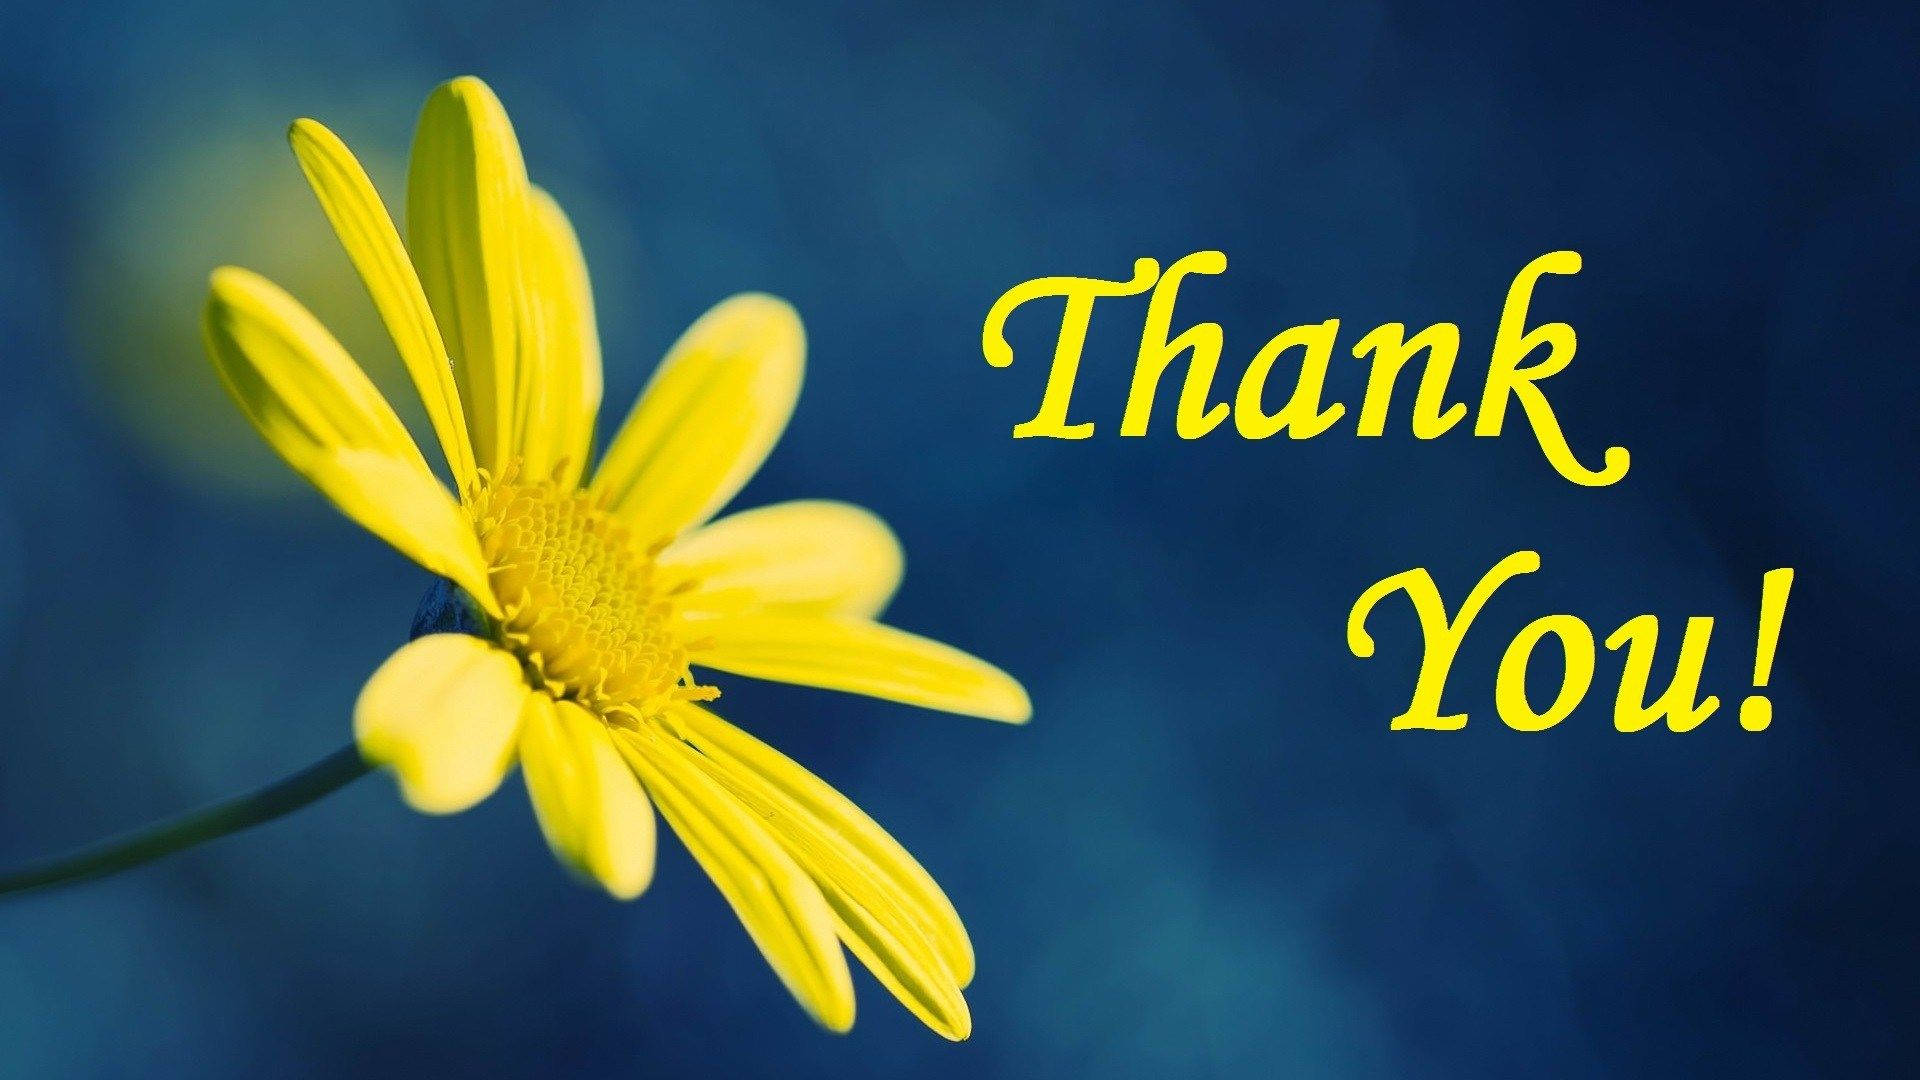 Saying Thanks For Watching With Yellow Daisy Background